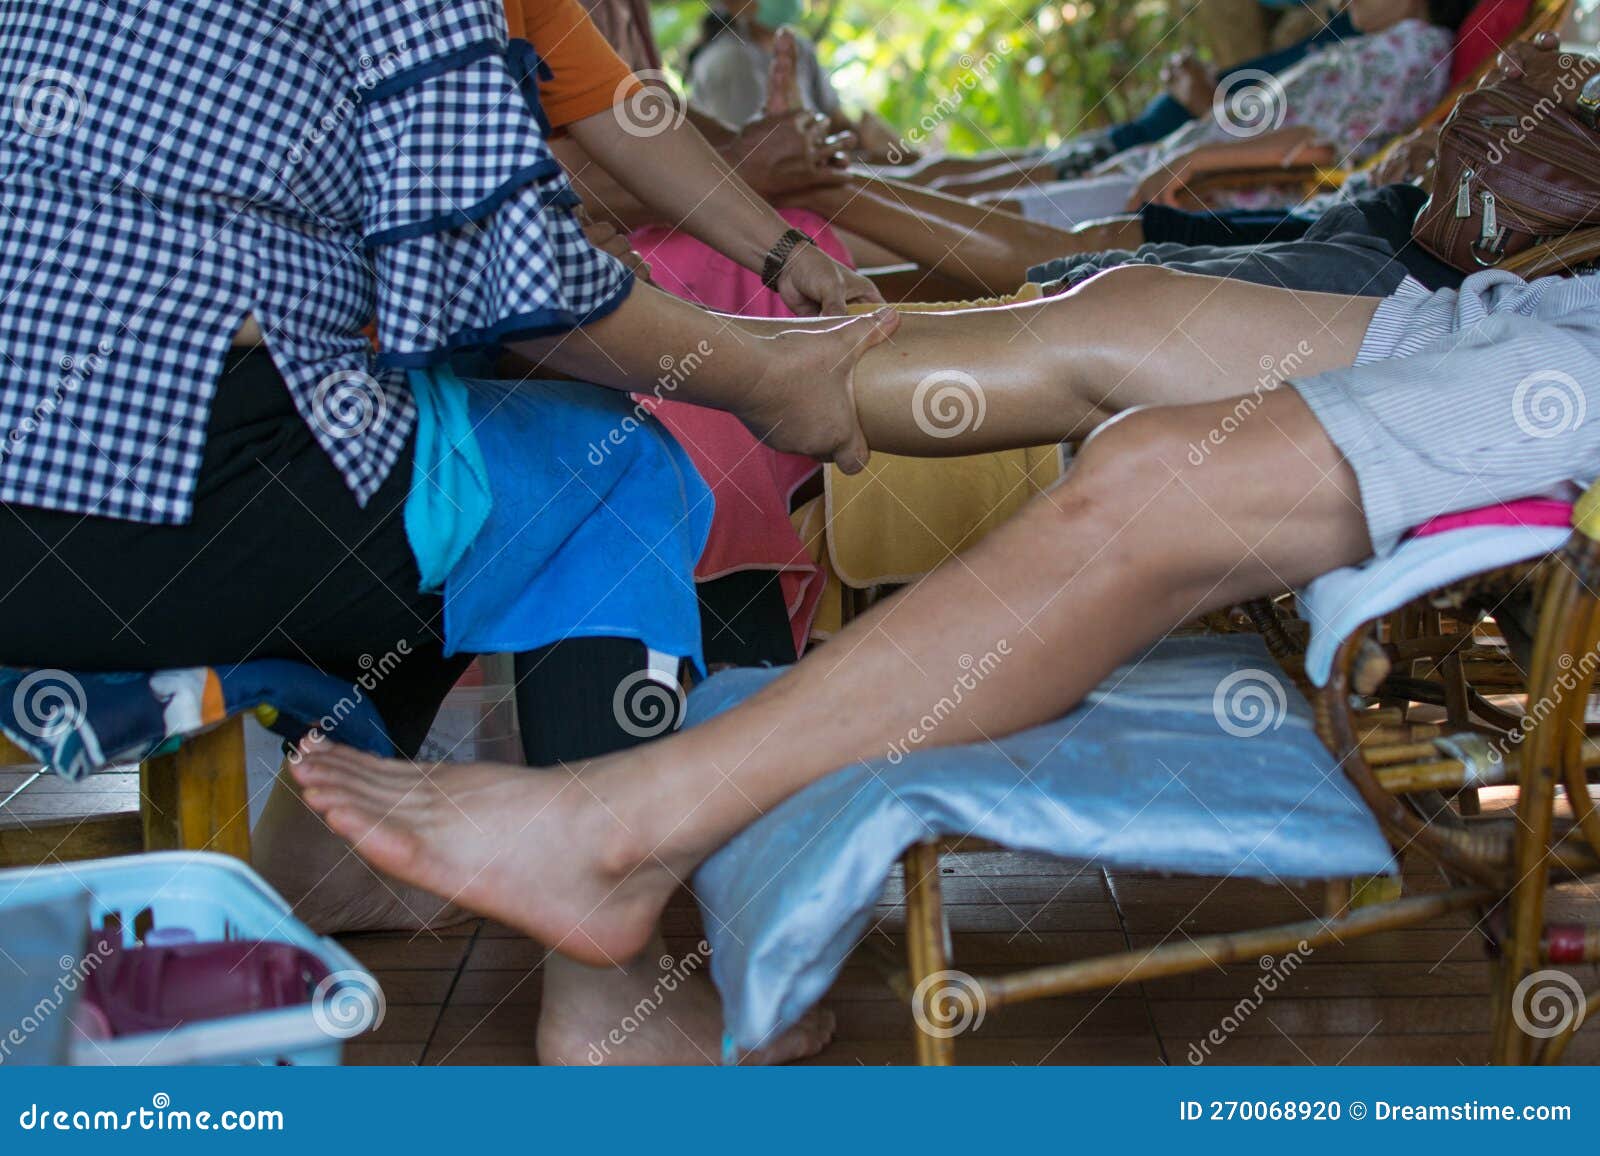 relaxing thai foot massage in thailand